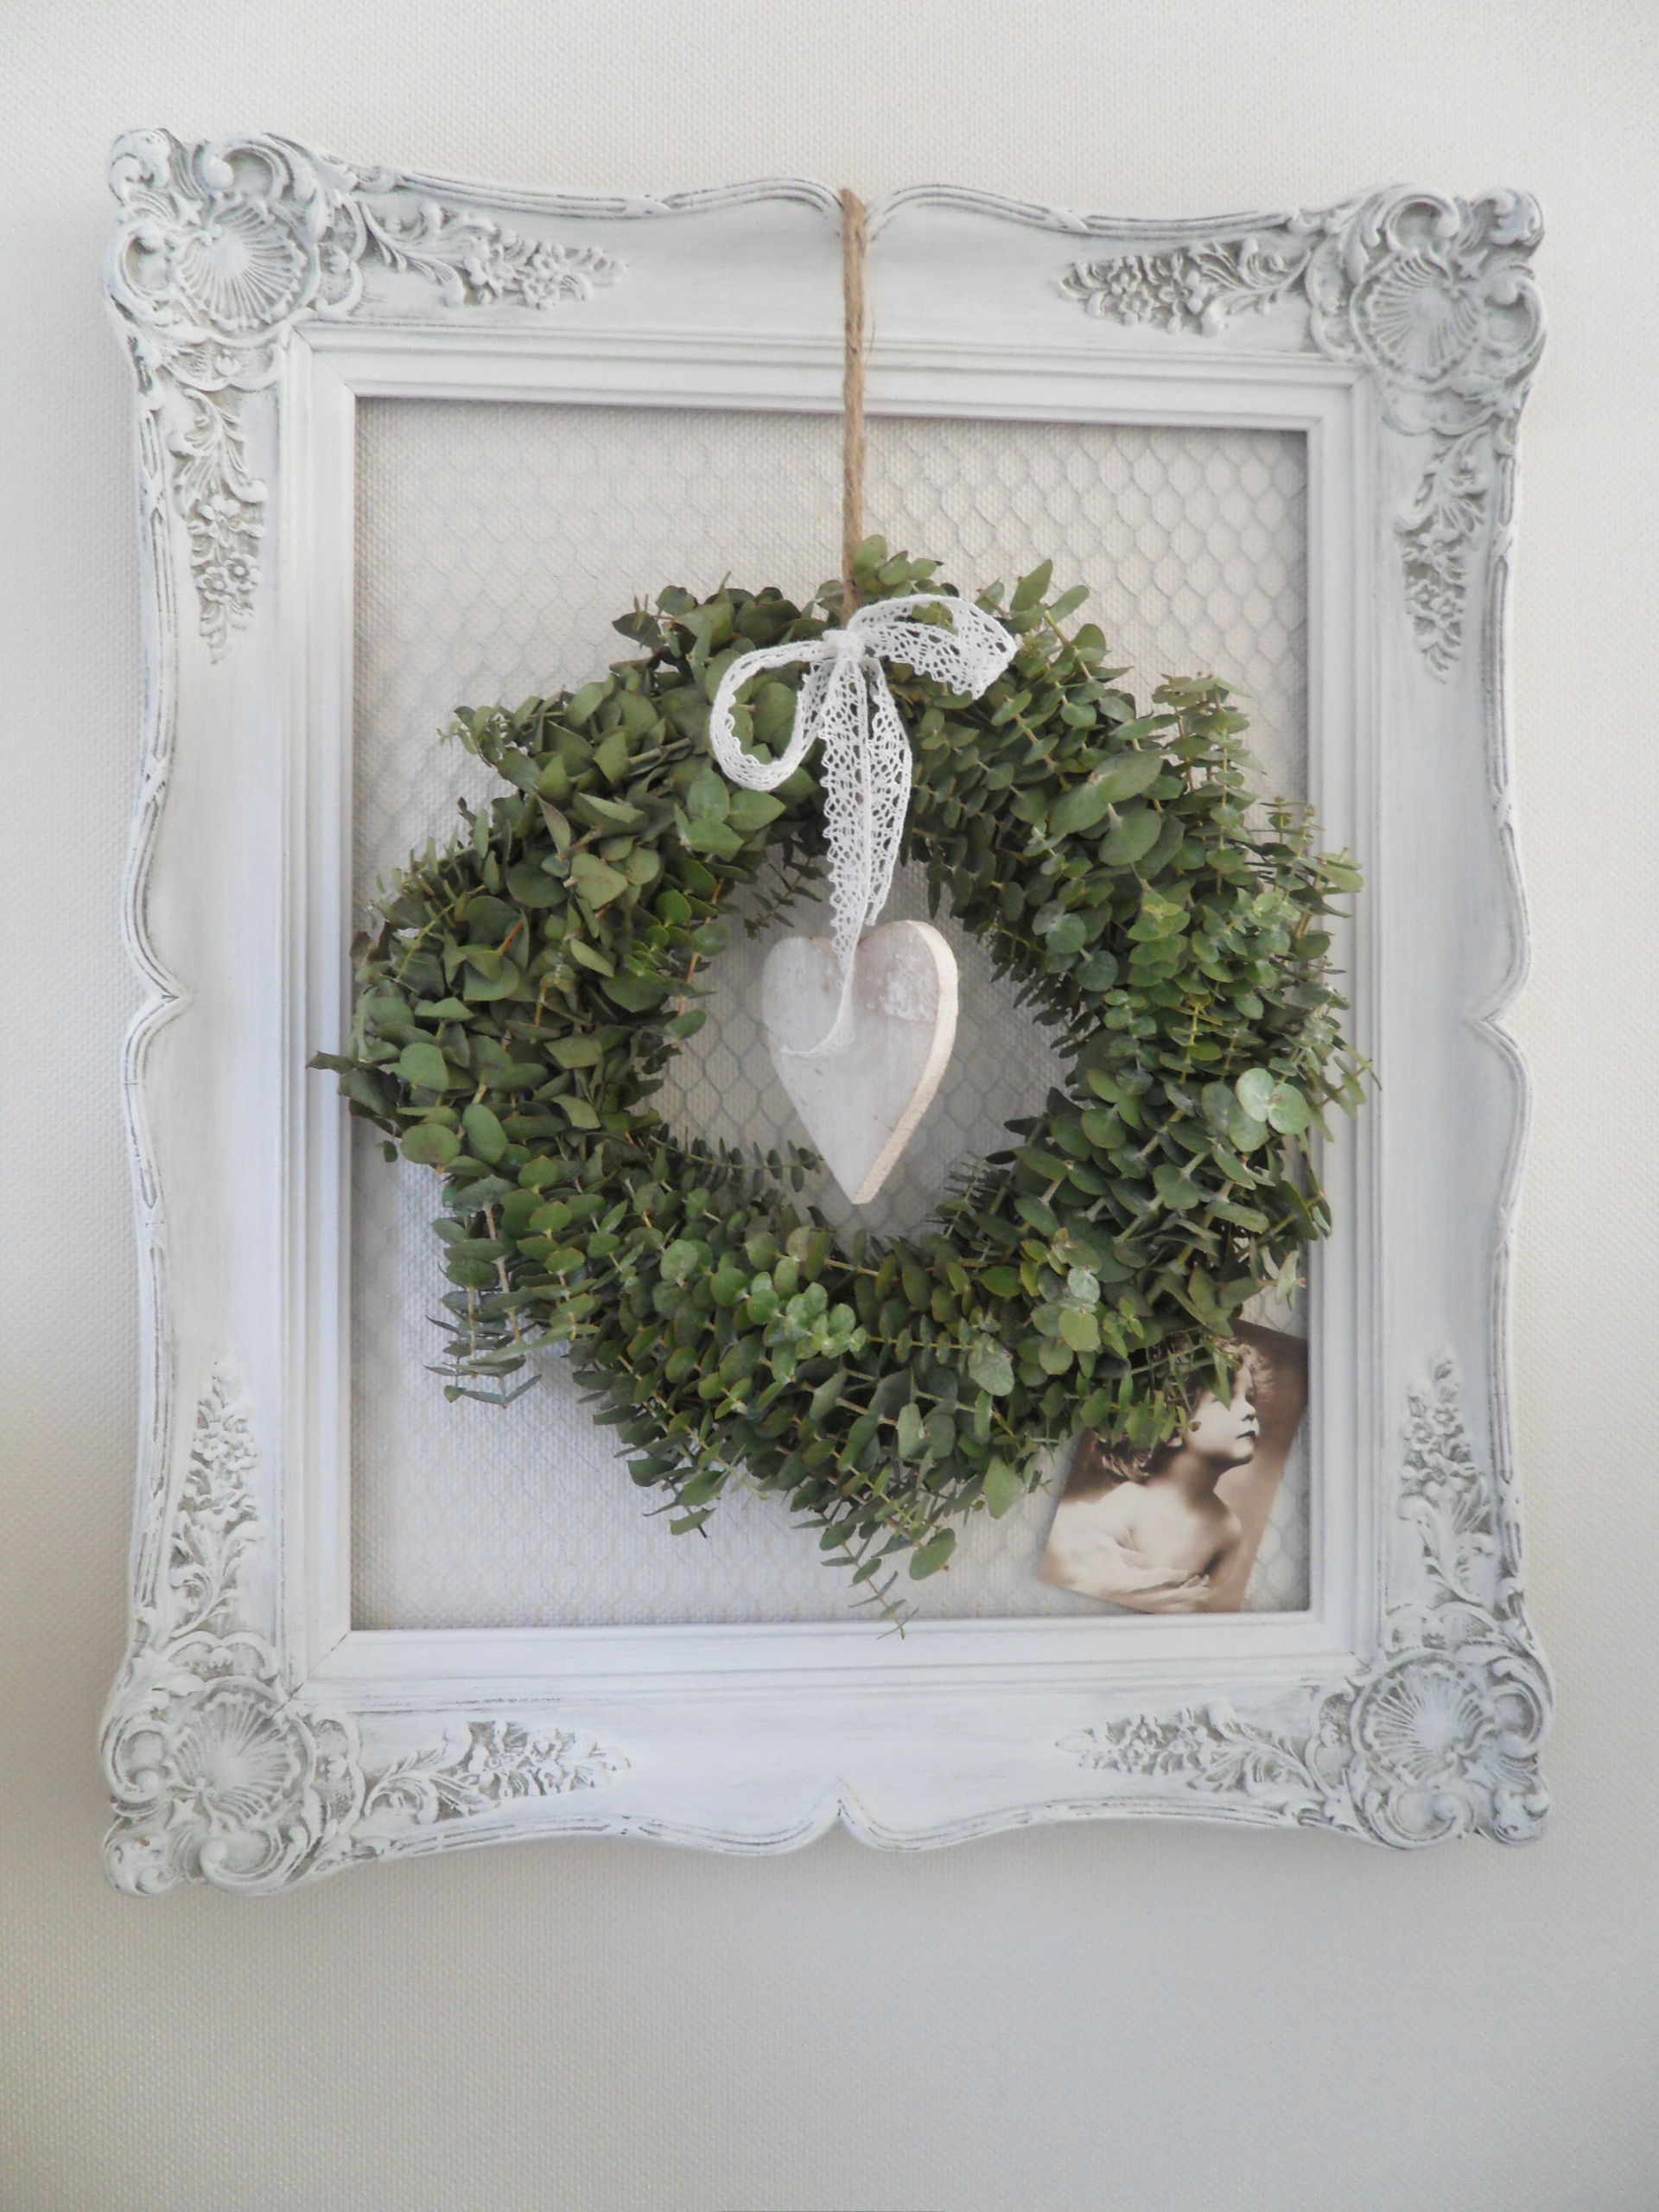 Framed eucalyptus wreath would always looks stylish and smells great.